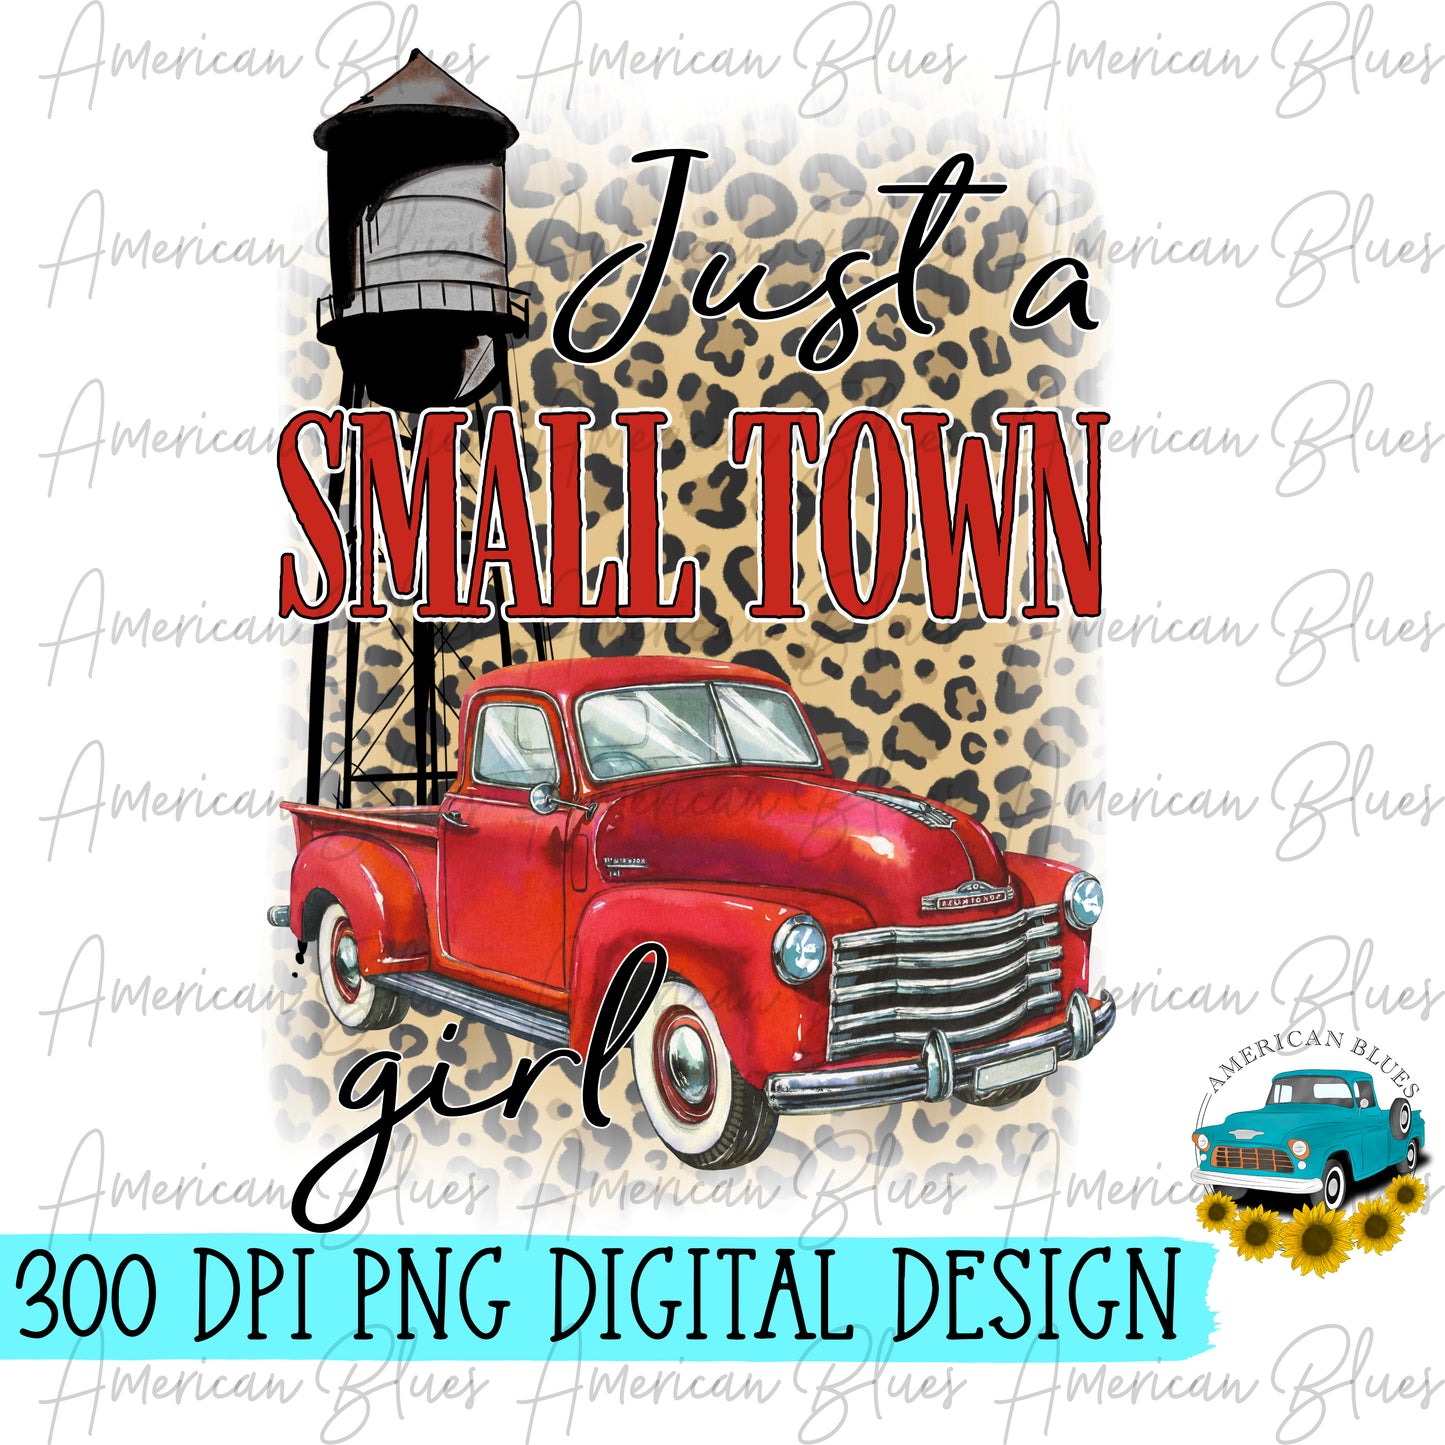 Just a small town girl red truck- watertower